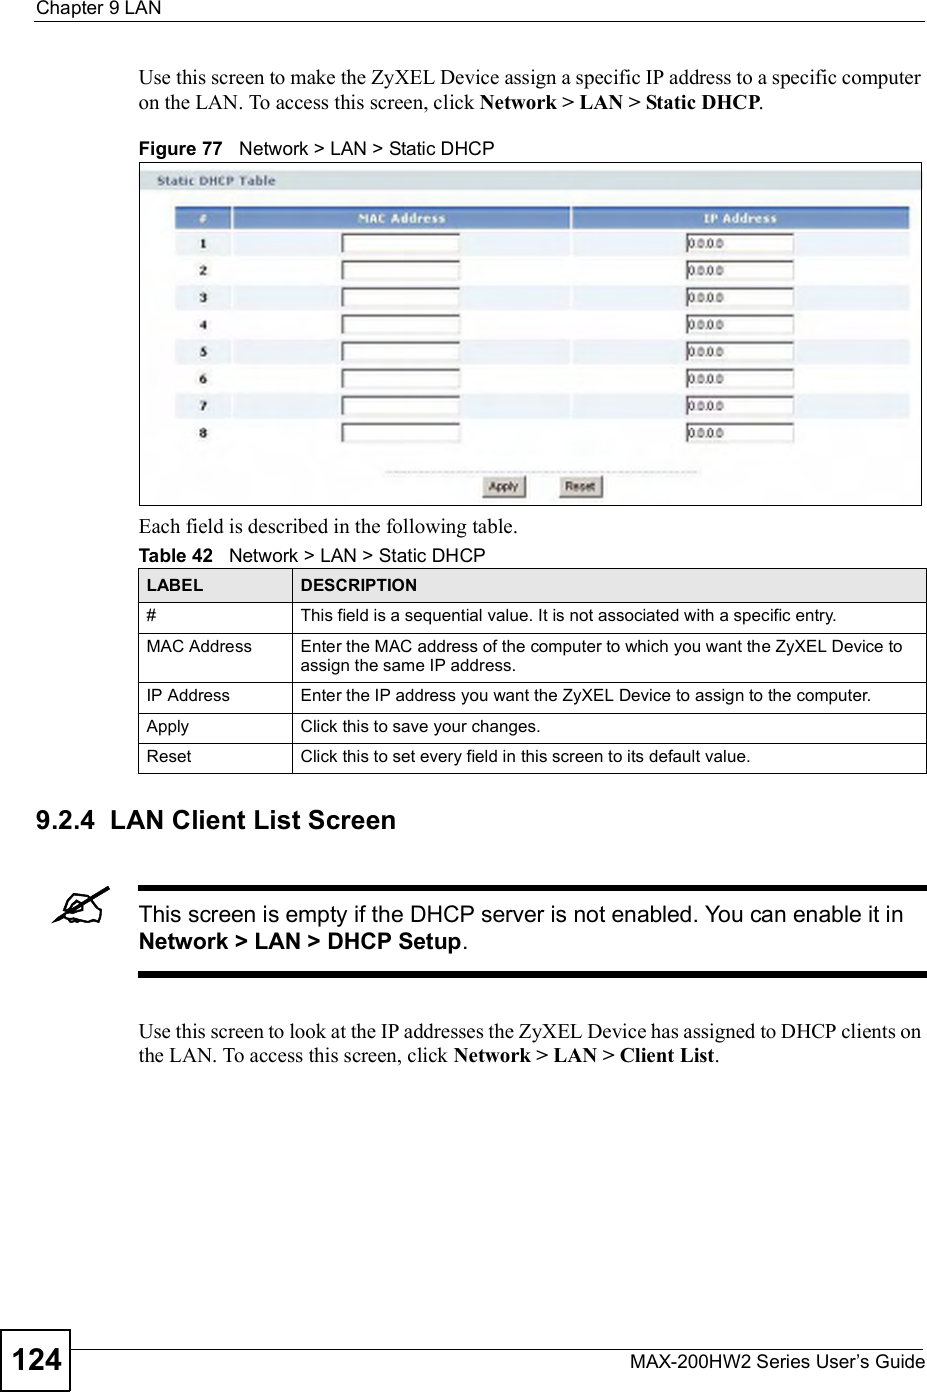 Chapter 9LANMAX-200HW2 Series User s Guide124Use this screen to make the ZyXEL Device assign a specific IP address to a specific computer on the LAN. To access this screen, click Network &gt; LAN &gt; Static DHCP.Figure 77   Network &gt; LAN &gt; Static DHCPEach field is described in the following table.9.2.4  LAN Client List ScreenThis screen is empty if the DHCP server is not enabled. You can enable it in Network &gt; LAN &gt; DHCP Setup.Use this screen to look at the IP addresses the ZyXEL Device has assigned to DHCP clients on the LAN. To access this screen, click Network &gt; LAN &gt; Client List.Table 42   Network &gt; LAN &gt; Static DHCPLABEL DESCRIPTION#This field is a sequential value. It is not associated with a specific entry.MAC Address Enter the MAC address of the computer to which you want the ZyXEL Device to assign the same IP address.IP Address Enter the IP address you want the ZyXEL Device to assign to the computer.Apply Click this to save your changes.Reset Click this to set every field in this screen to its default value.